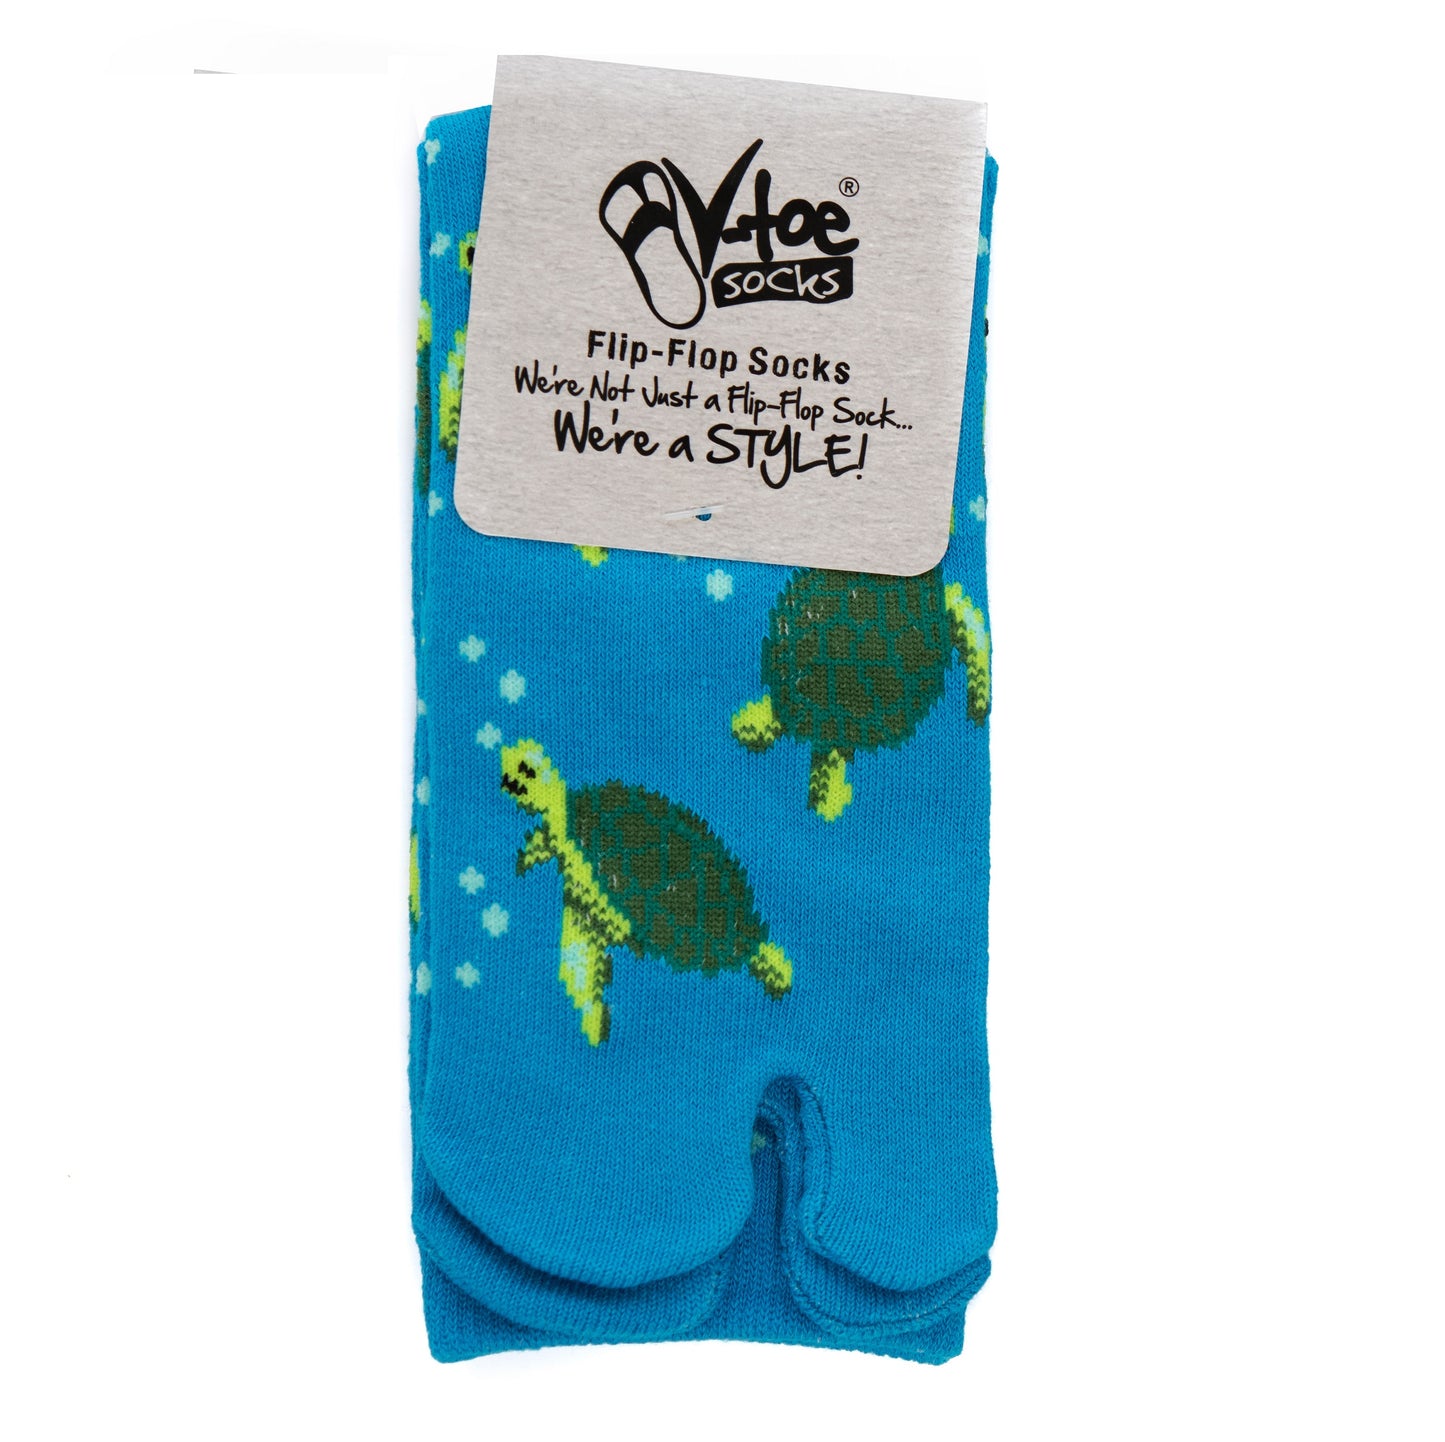 1 Pair - V-Toe Flip Flop Tabi Socks - Turquoise with Green Turtle